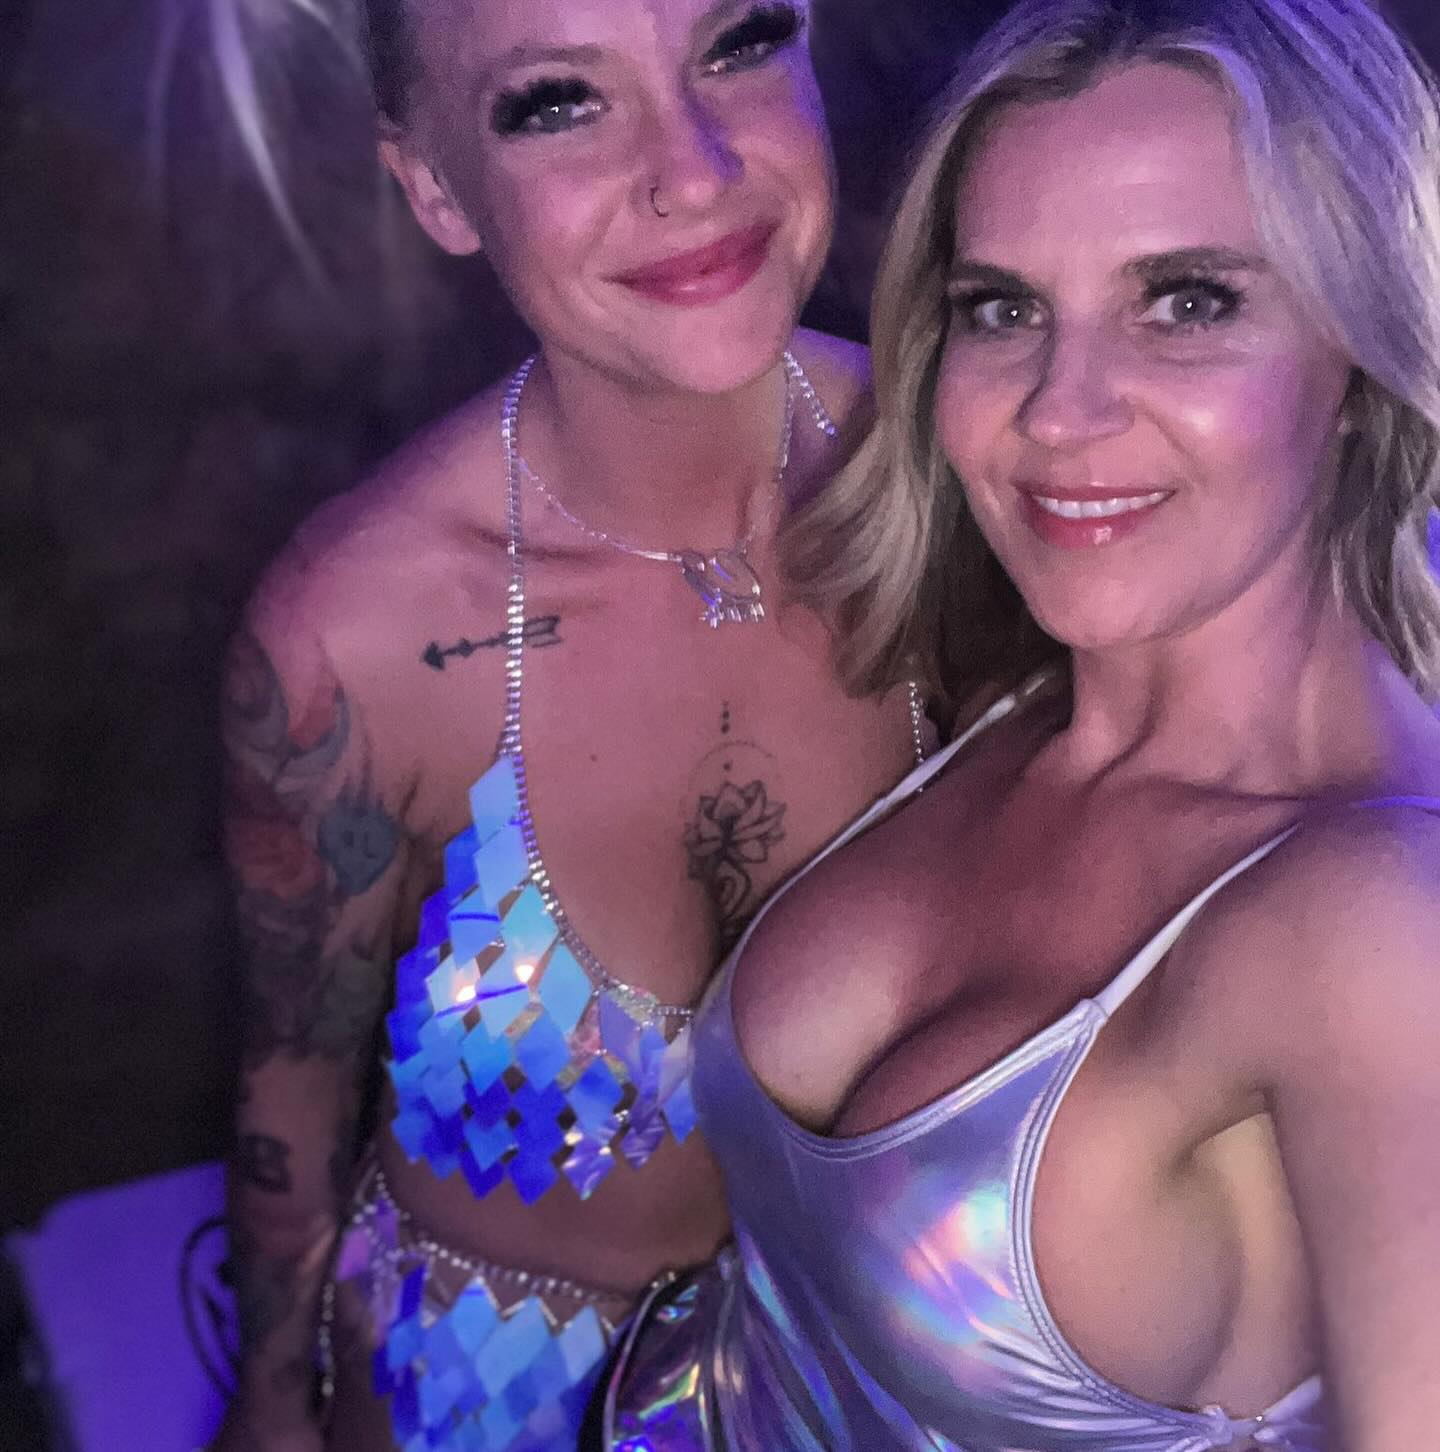 Had so much this past weekend with my @thehotwifetour sisters at the @partiesicandy holographic party.  What an unforgettable weekend at @secretshideaway. 😈

@cam_morie2 @officialkarinav @leahlayz 😍

#thehotwifetour #secretsfl #secretsflorida #florida #blondebombshell #blueeyedgirls #icandy #icandyparties #hotwife #hotwifelife #holographic